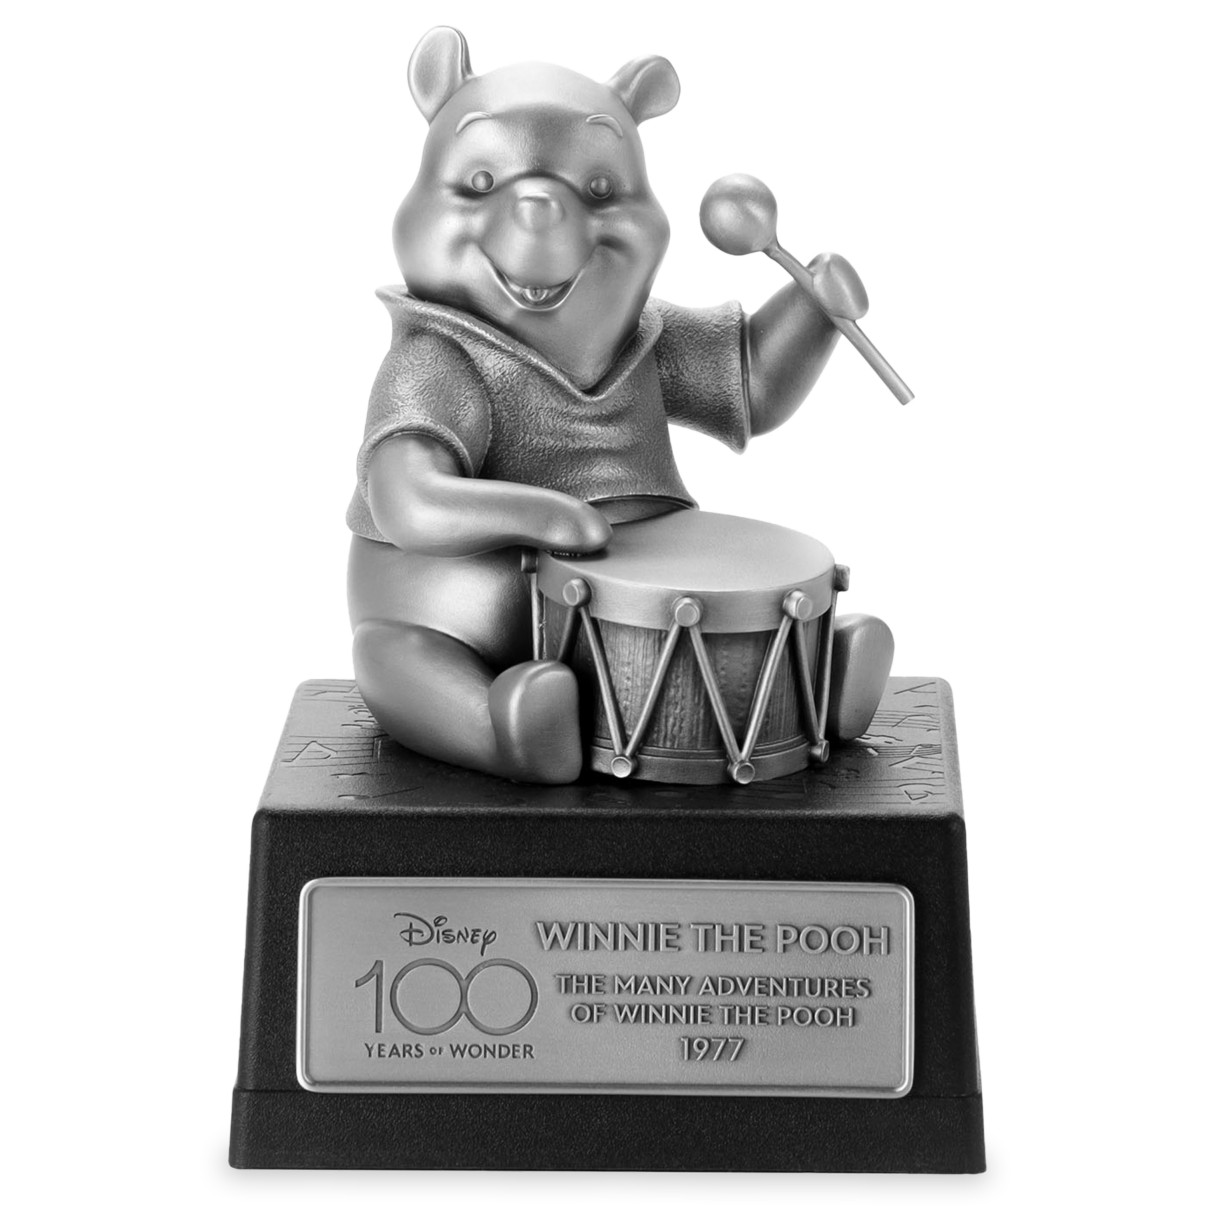 Winnie the Pooh Figure by Royal Selangor – Disney100 – Limited Edition